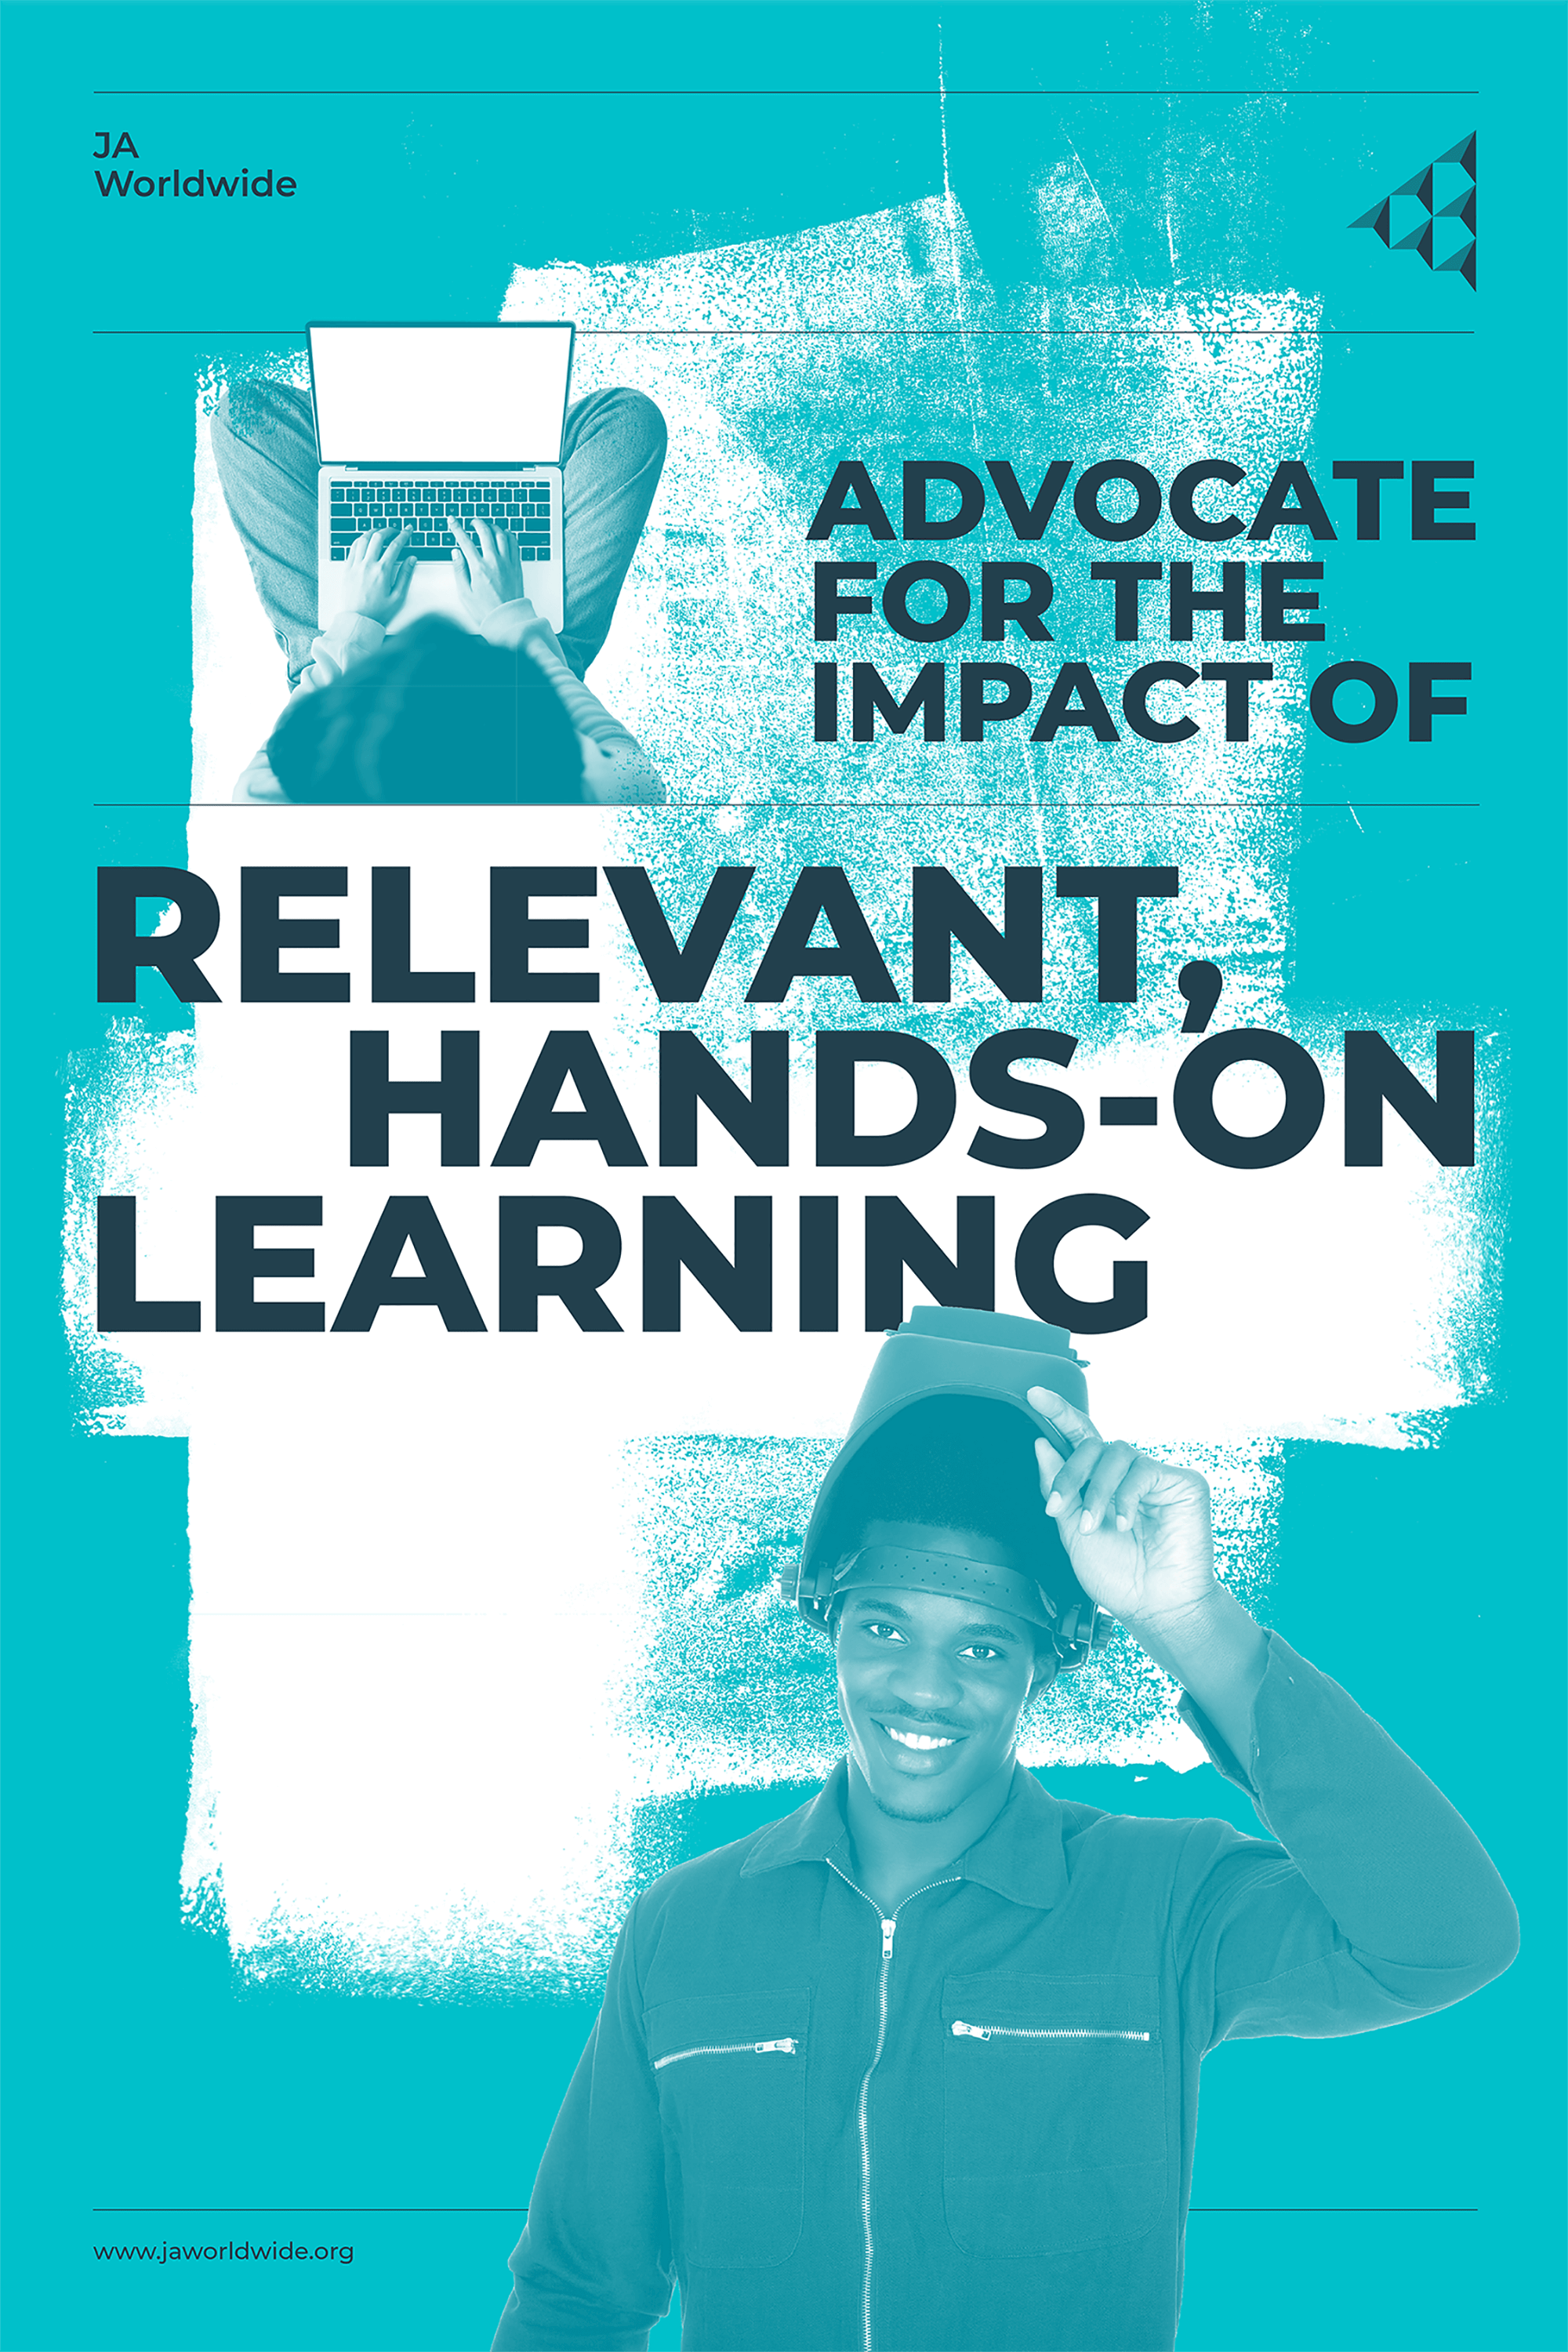 advocate for the impact of relevant, hands-on learning